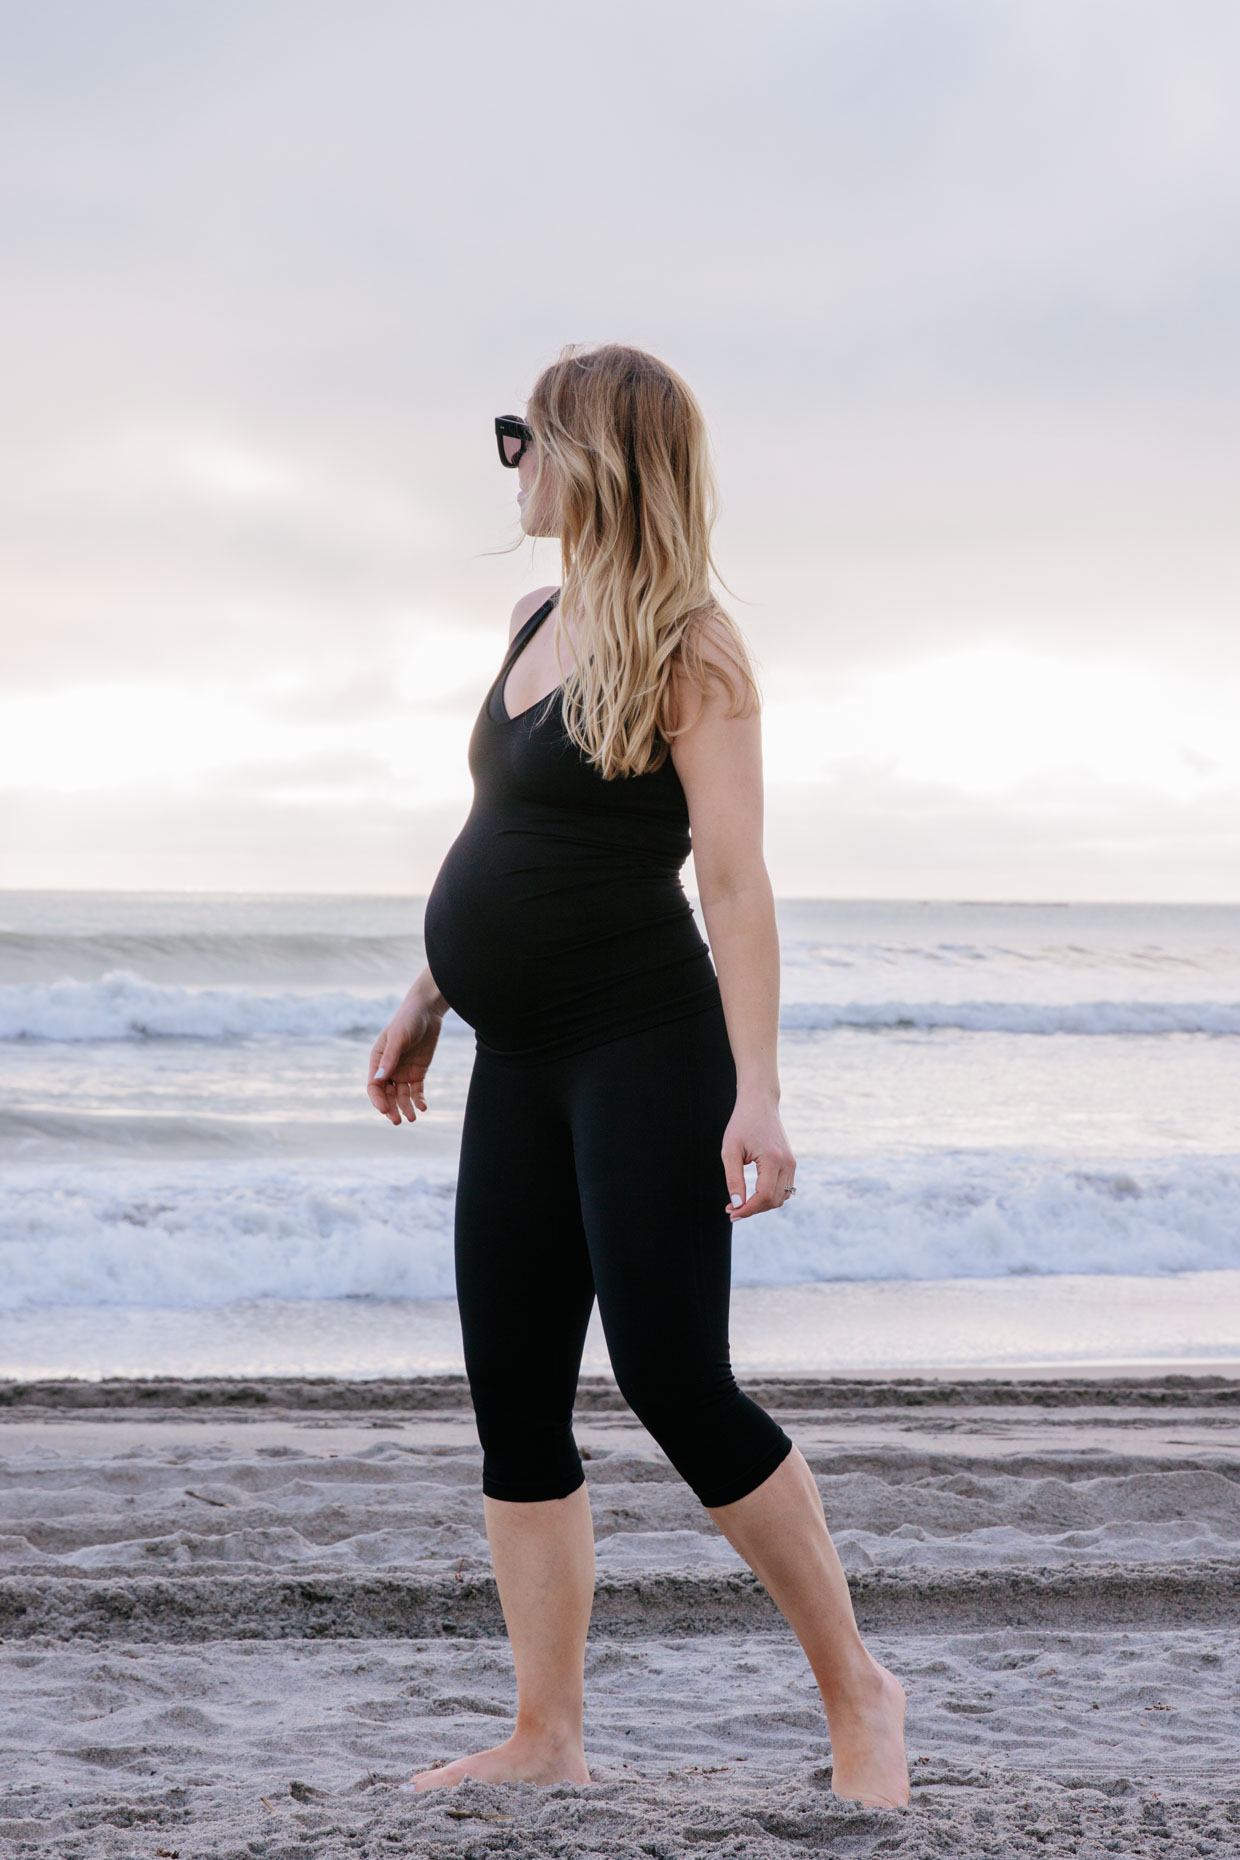 The Best Maternity Supportwear for an Active Pregnancy - Meagan's Moda